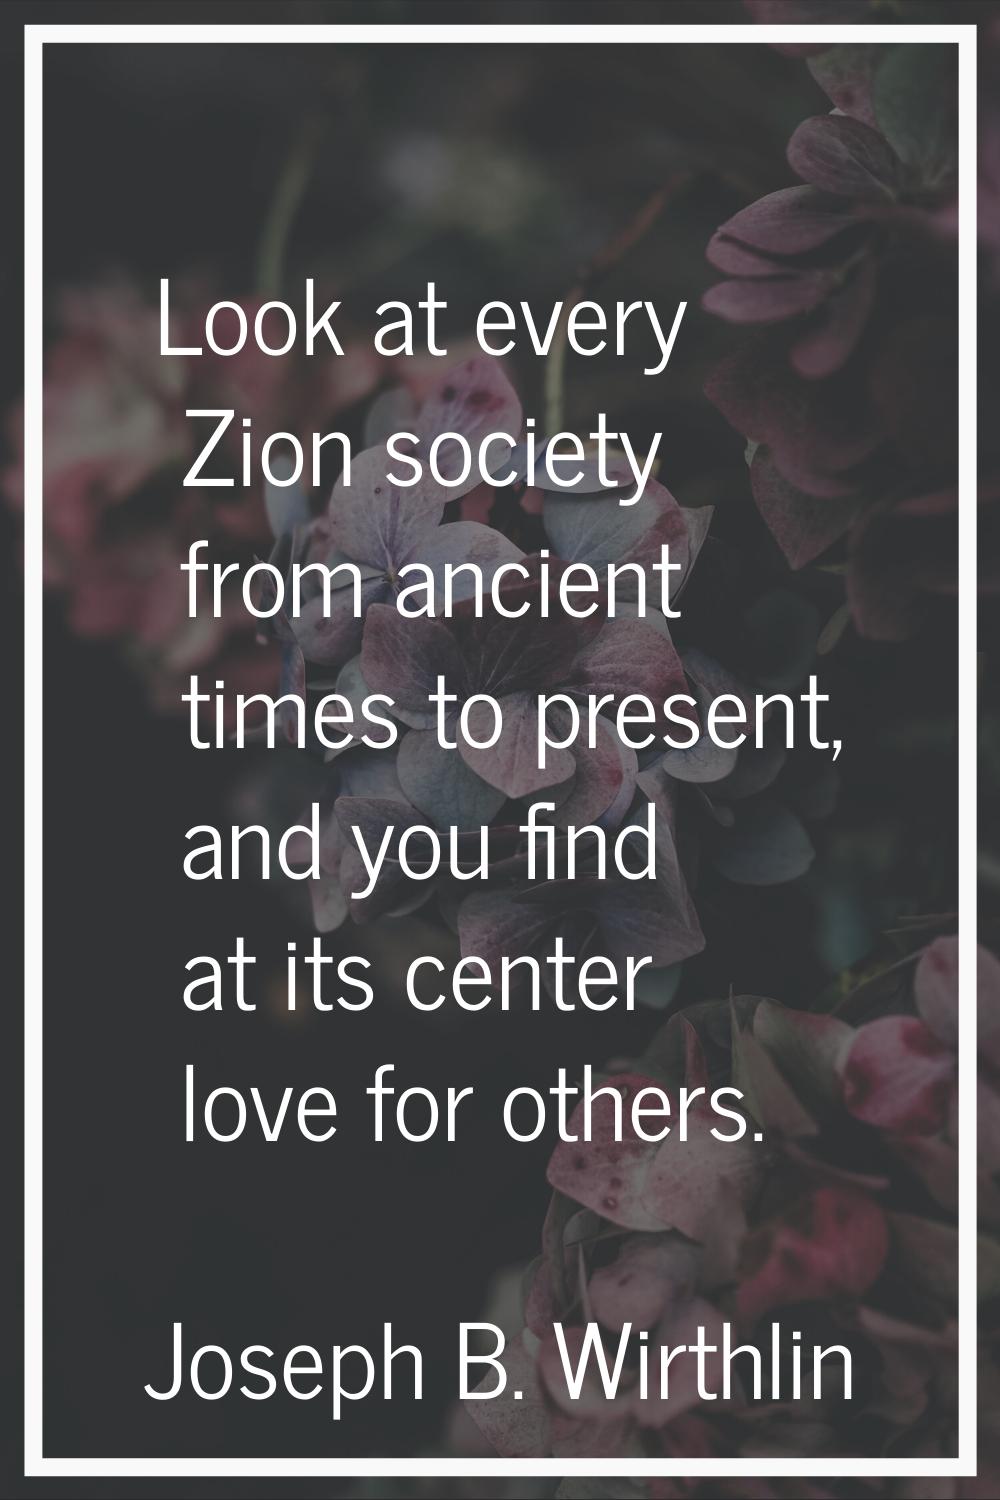 Look at every Zion society from ancient times to present, and you find at its center love for other